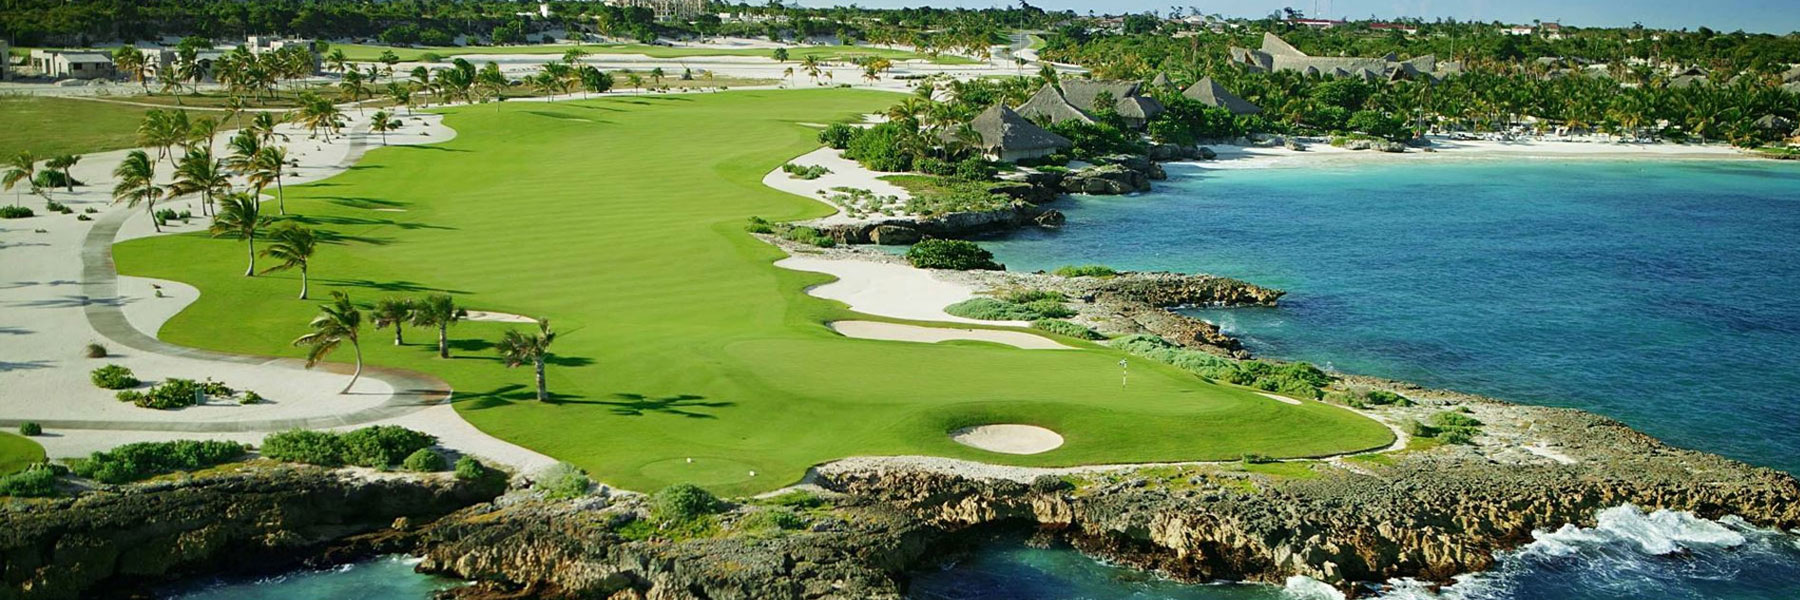 Dominican Republic Golf Vacation Packages